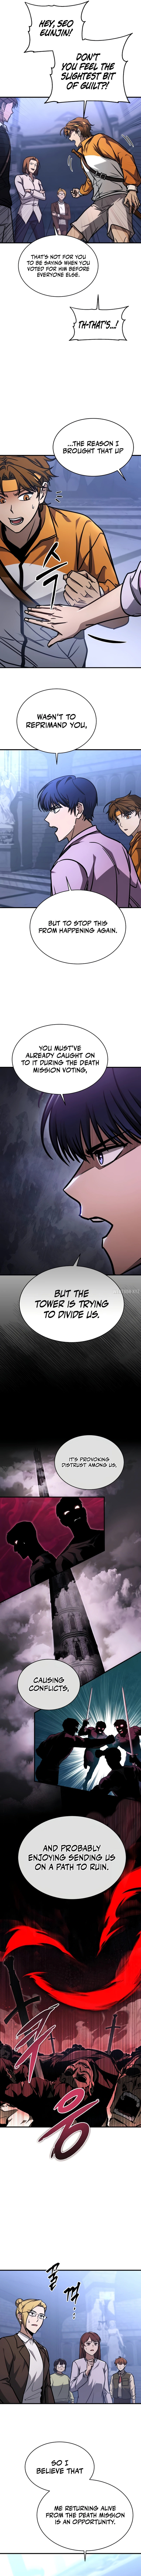 My Exclusive Tower Guide - Chapter 7 Page 9